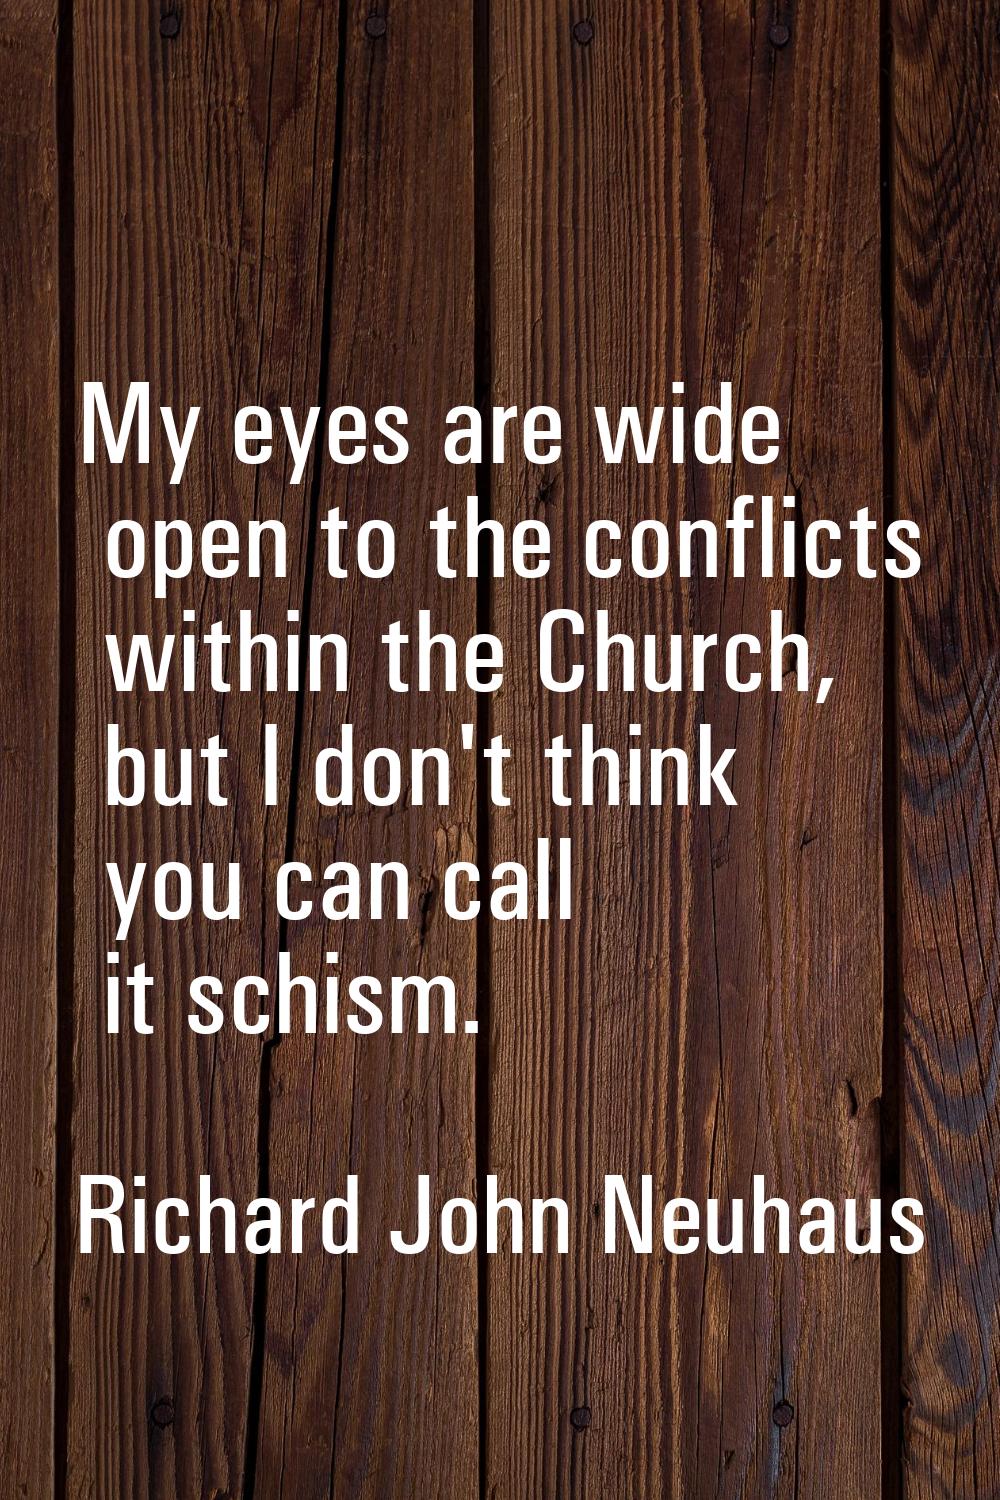 My eyes are wide open to the conflicts within the Church, but I don't think you can call it schism.